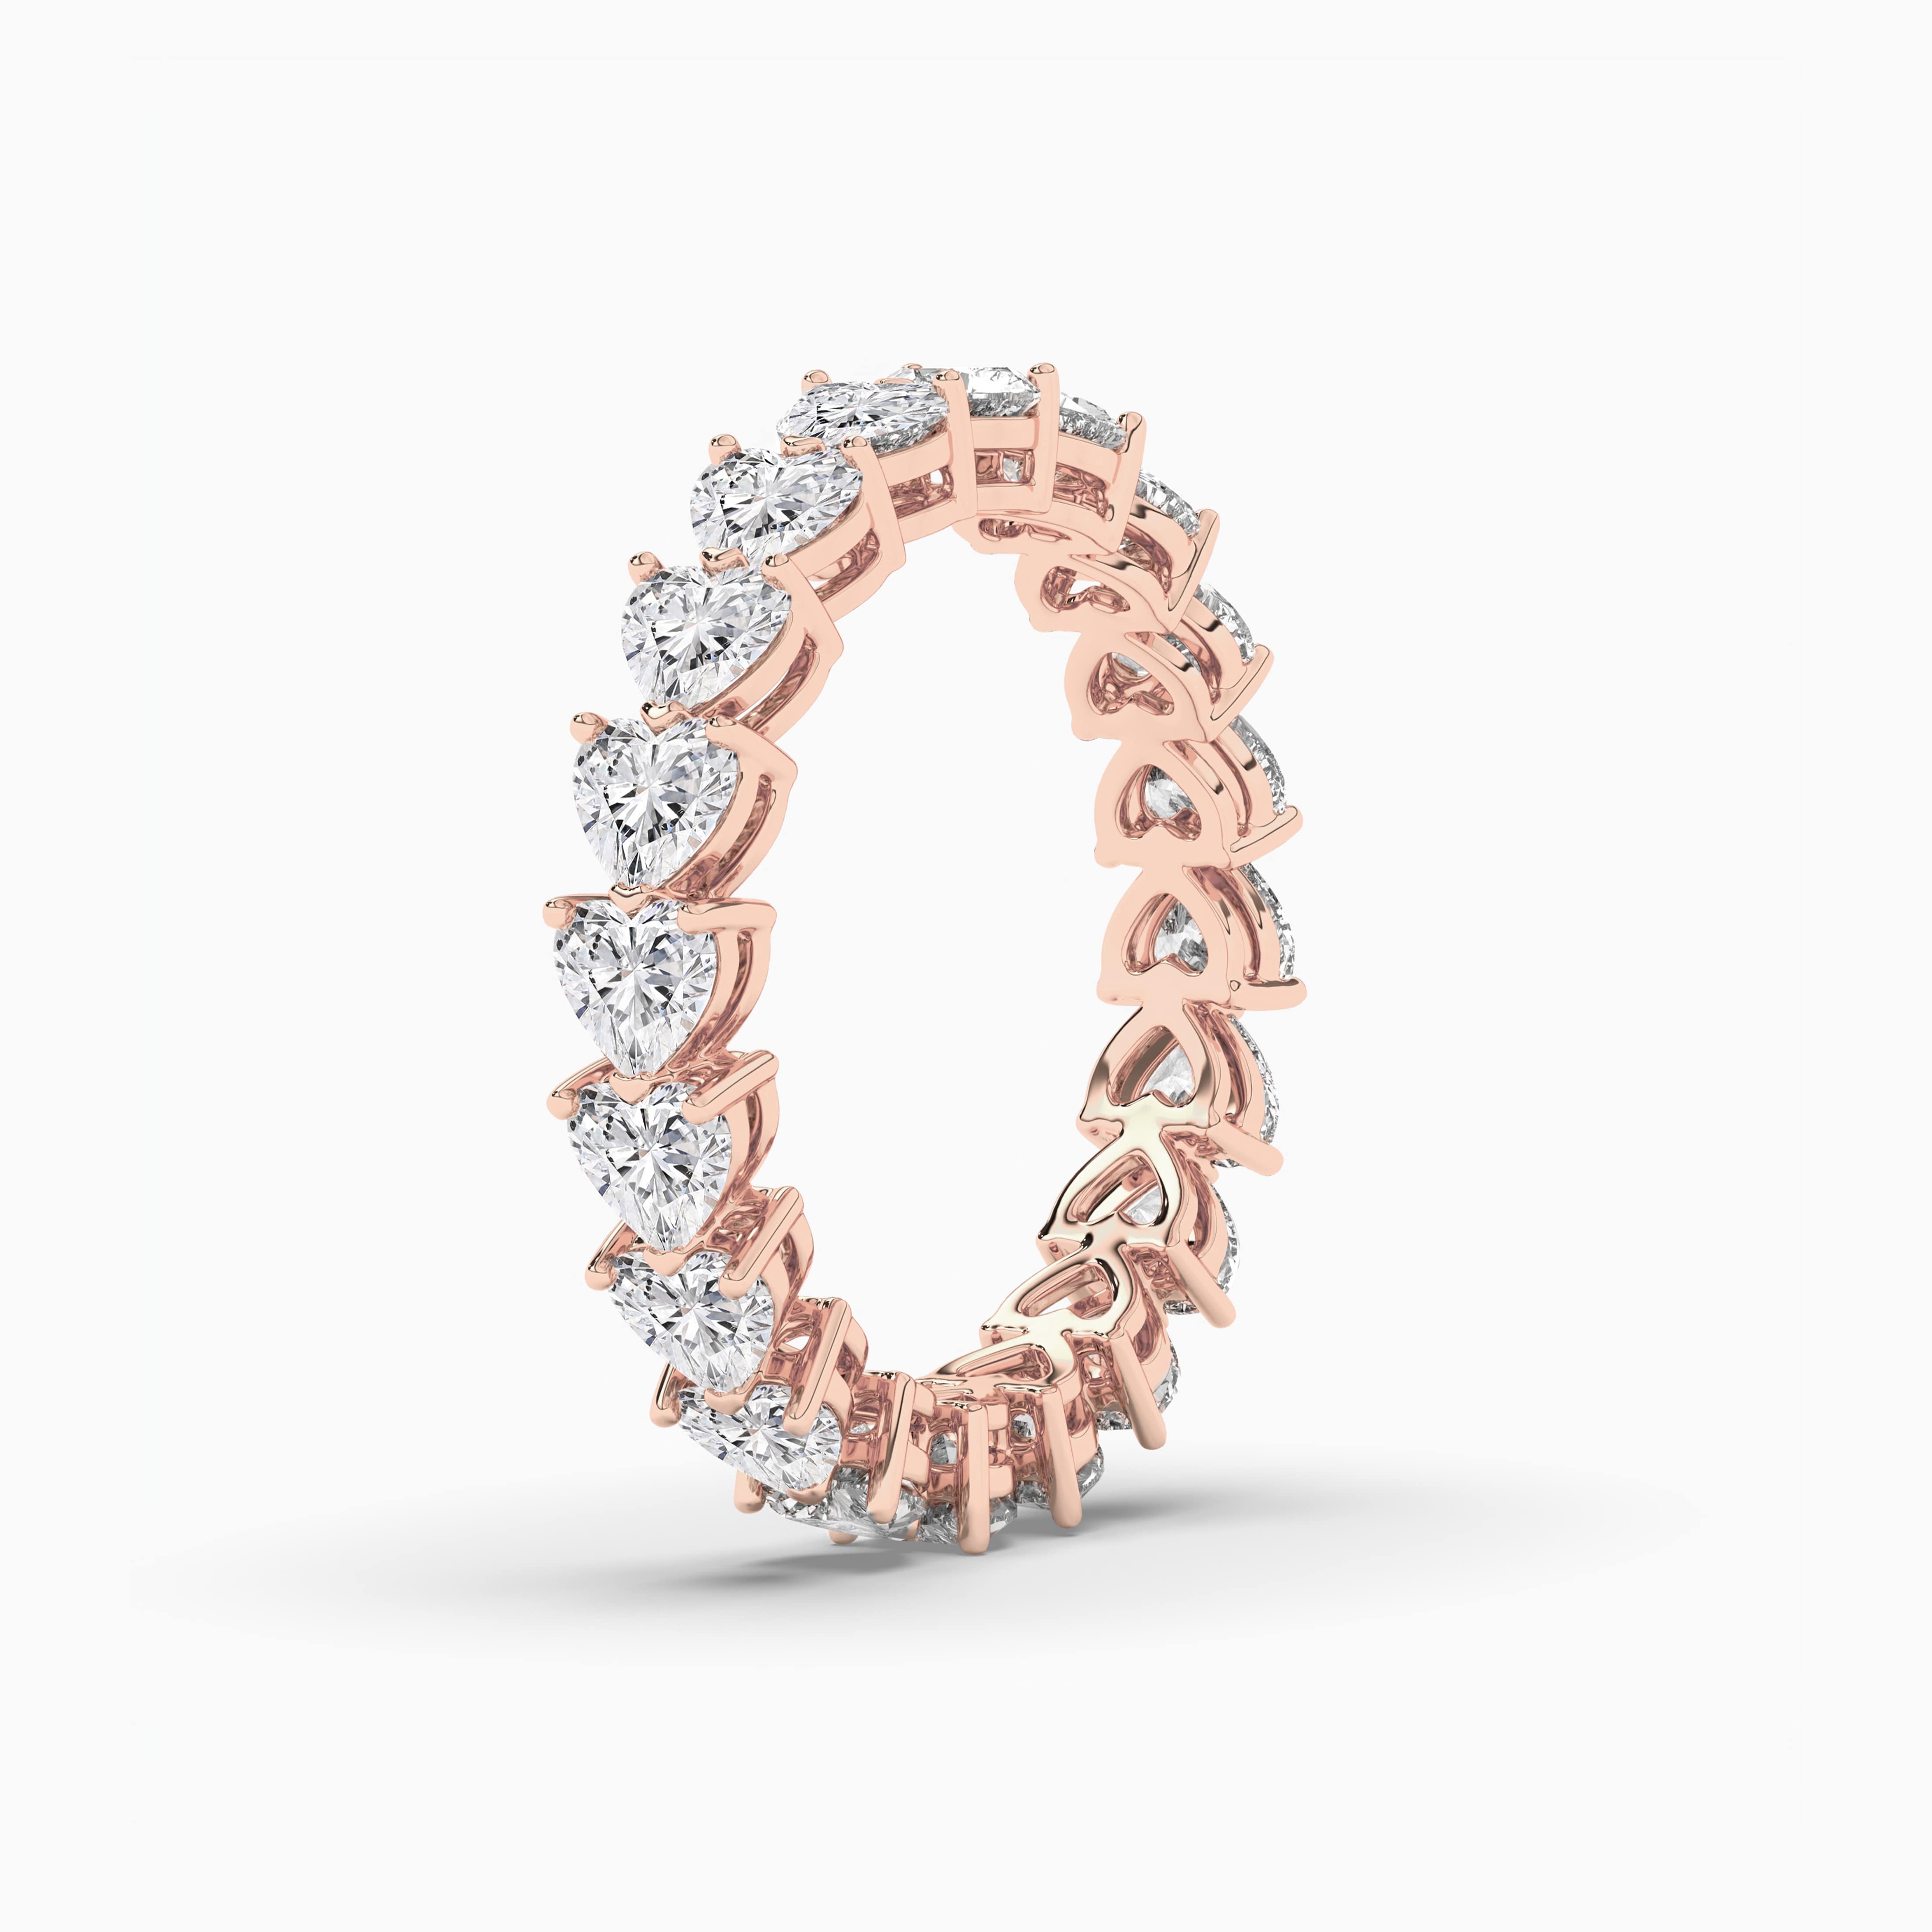 Eternity Ring with Heart Shaped Diamonds in Rose Gold